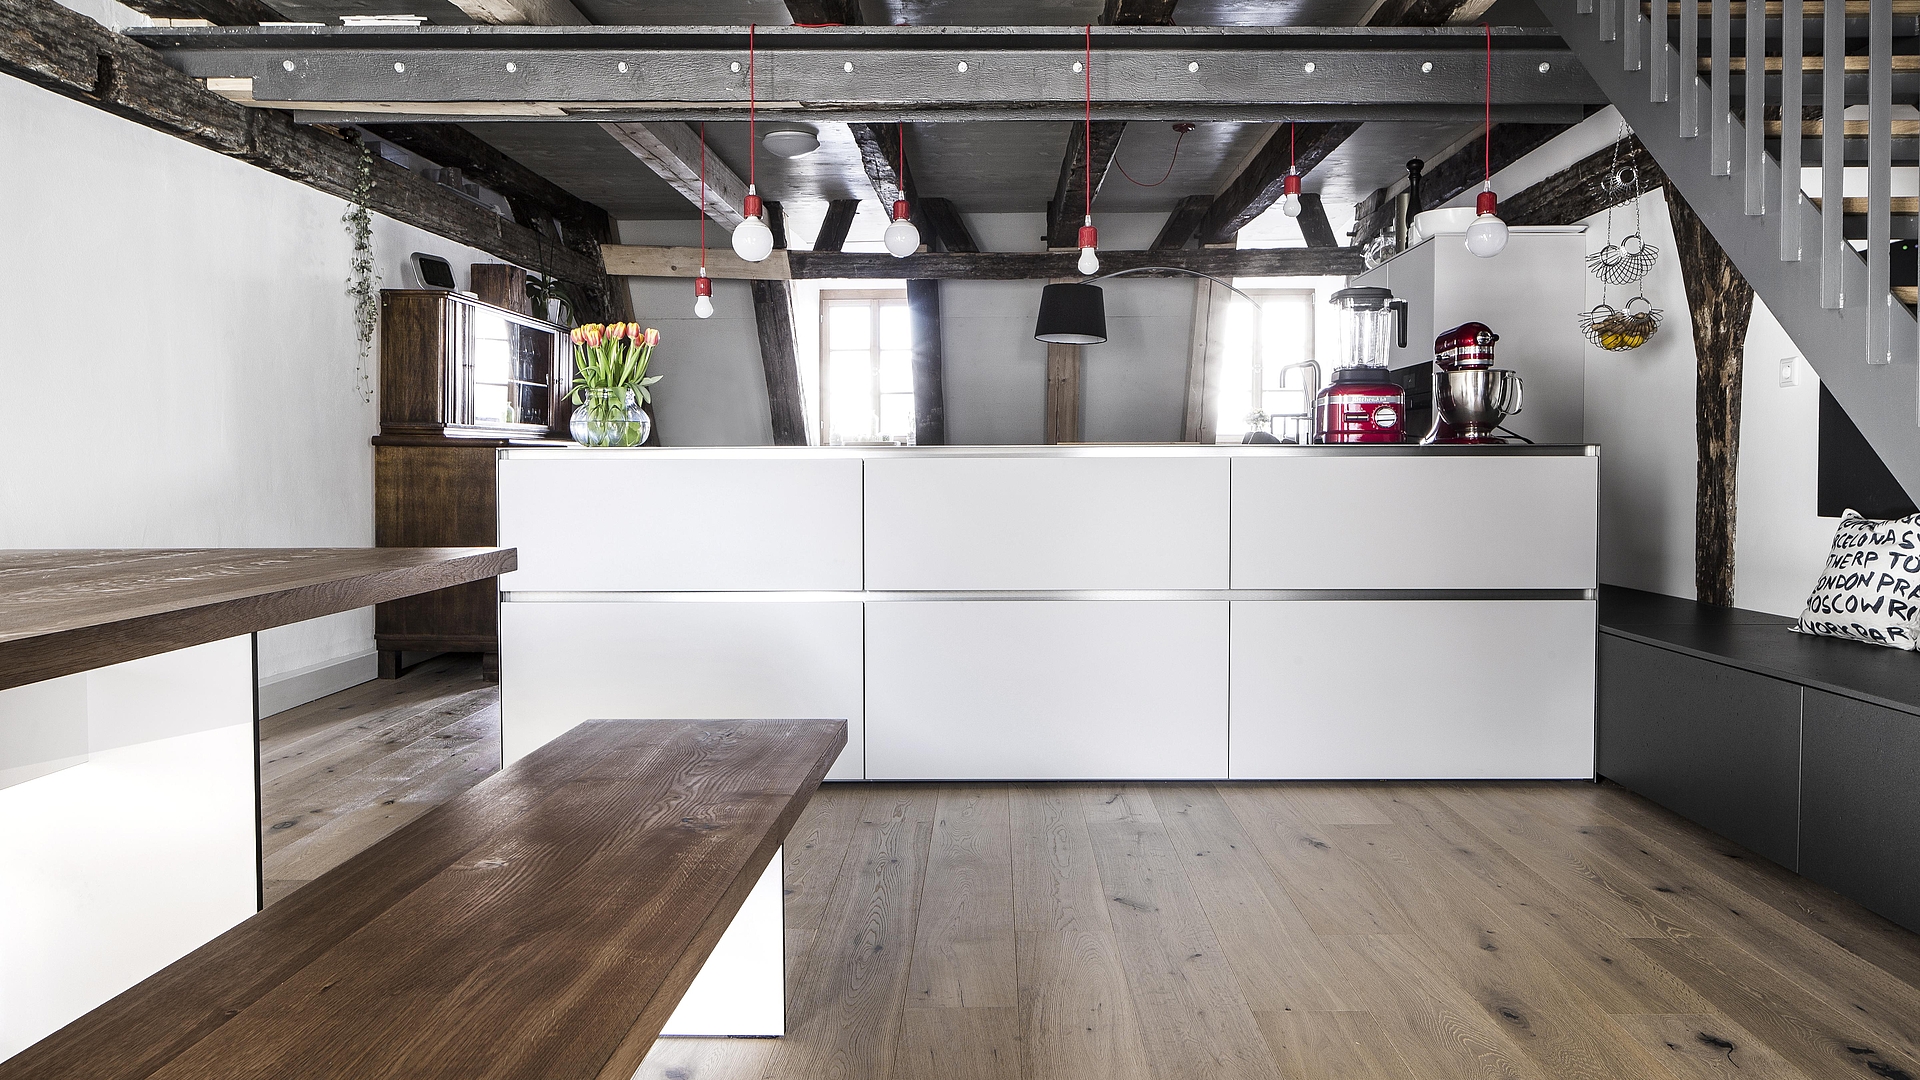 Modern kitchen in a historical town house